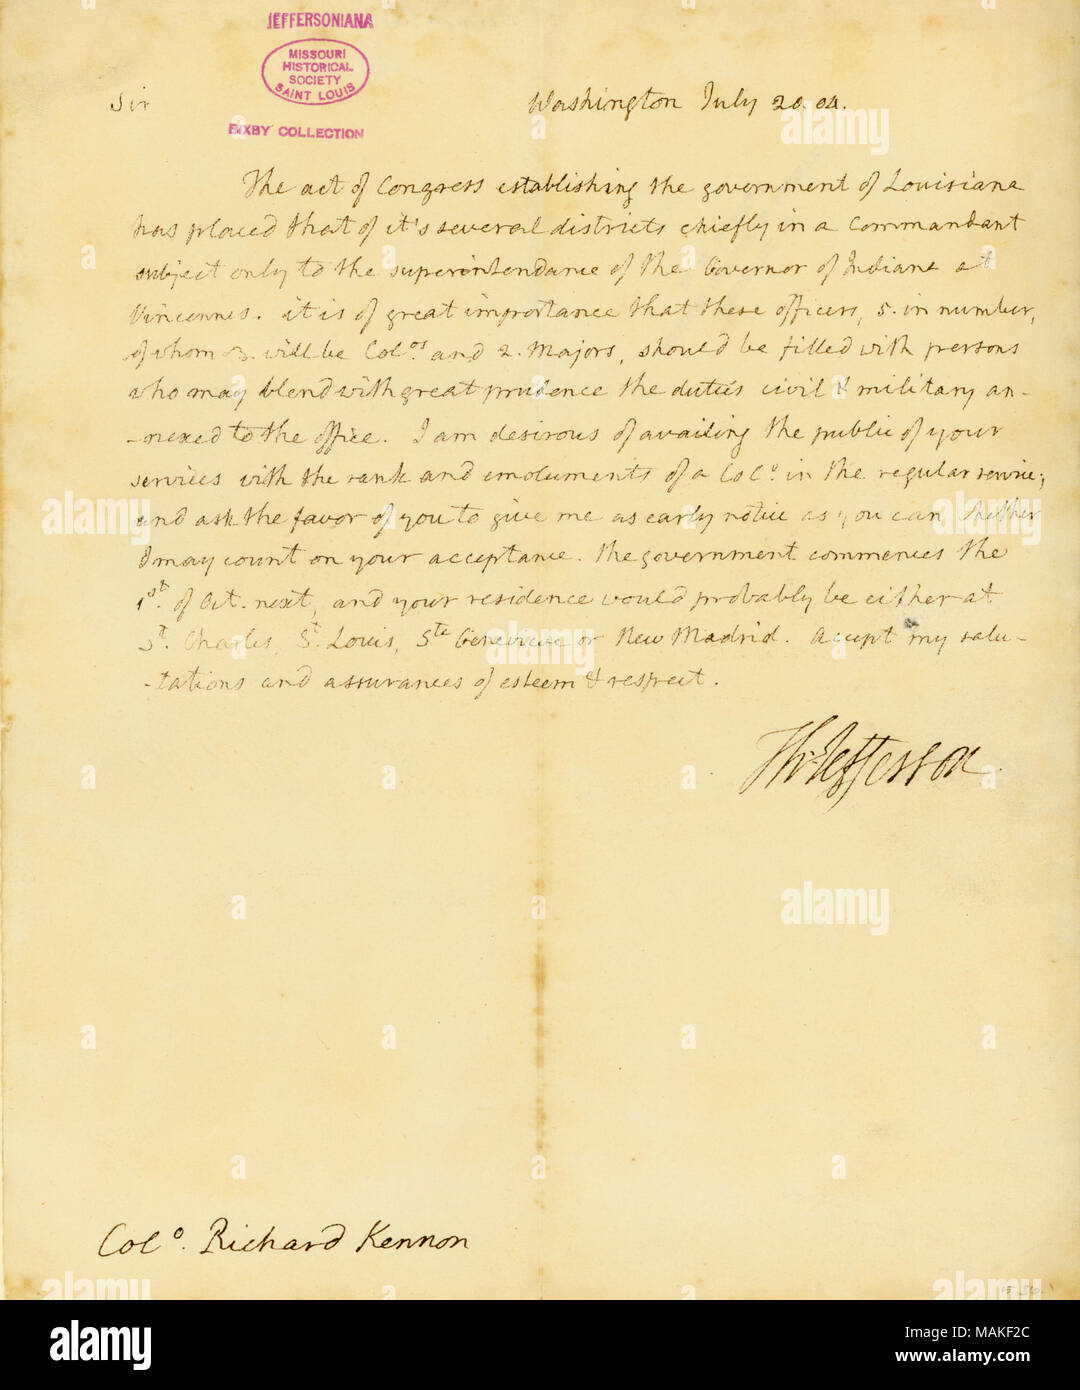 Offers Kennon an appointment as commandant with the rank of colonel at St. Charles, St. Louis, Ste. Genevieve, or New Madrid under the act of Congress to establish a government in the Louisiana Territory, the positions 'should be filled with persons who may blend with great prudence the duties civil and military annexed to the office.' Title: Letter signed Thomas Jefferson, Washington, to Col. Richard Kennon, July 20, 1804  . 20 July 1804. Jefferson, Thomas, 1743-1826 Stock Photo